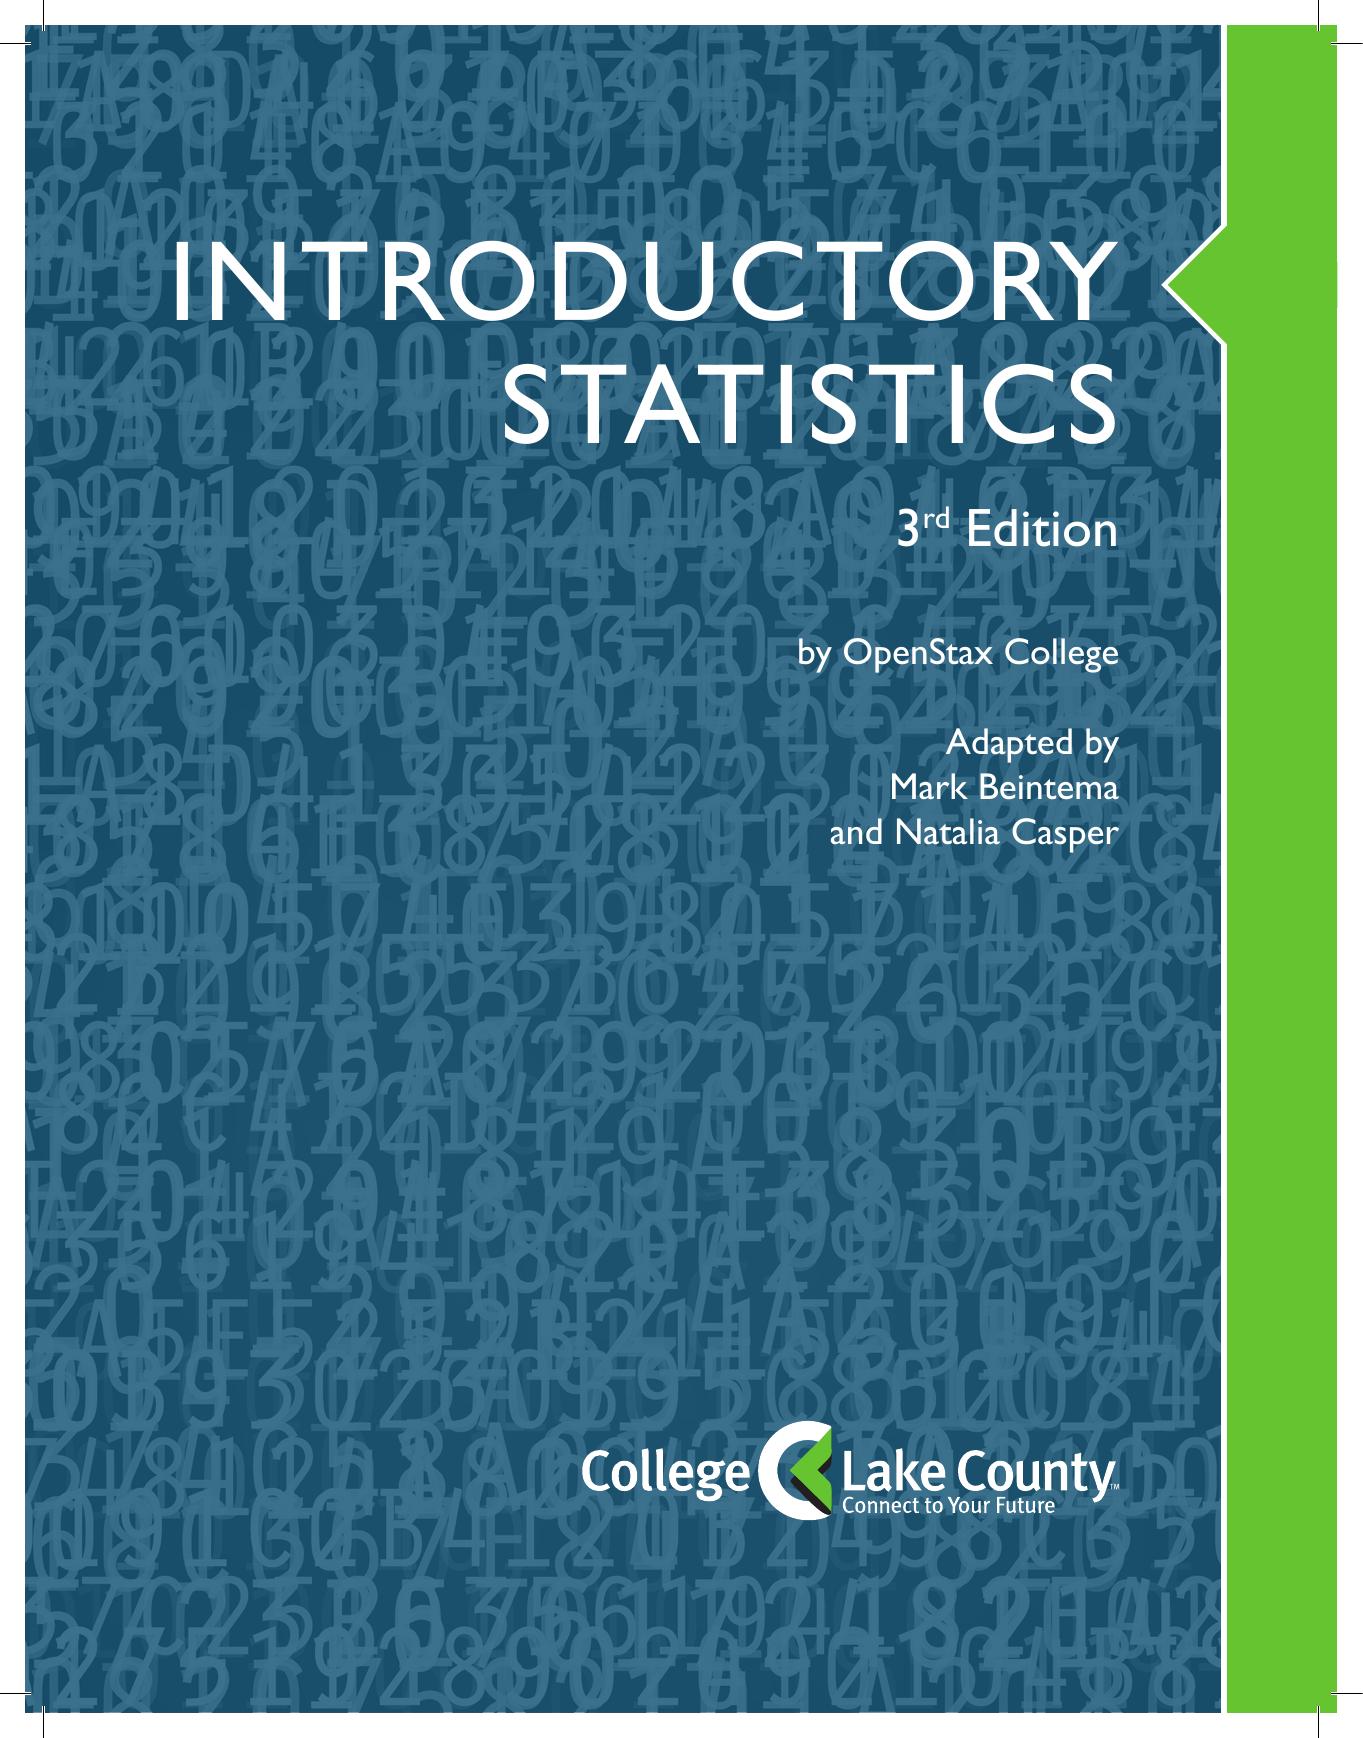 Introductory Statistics - 3rd Edition